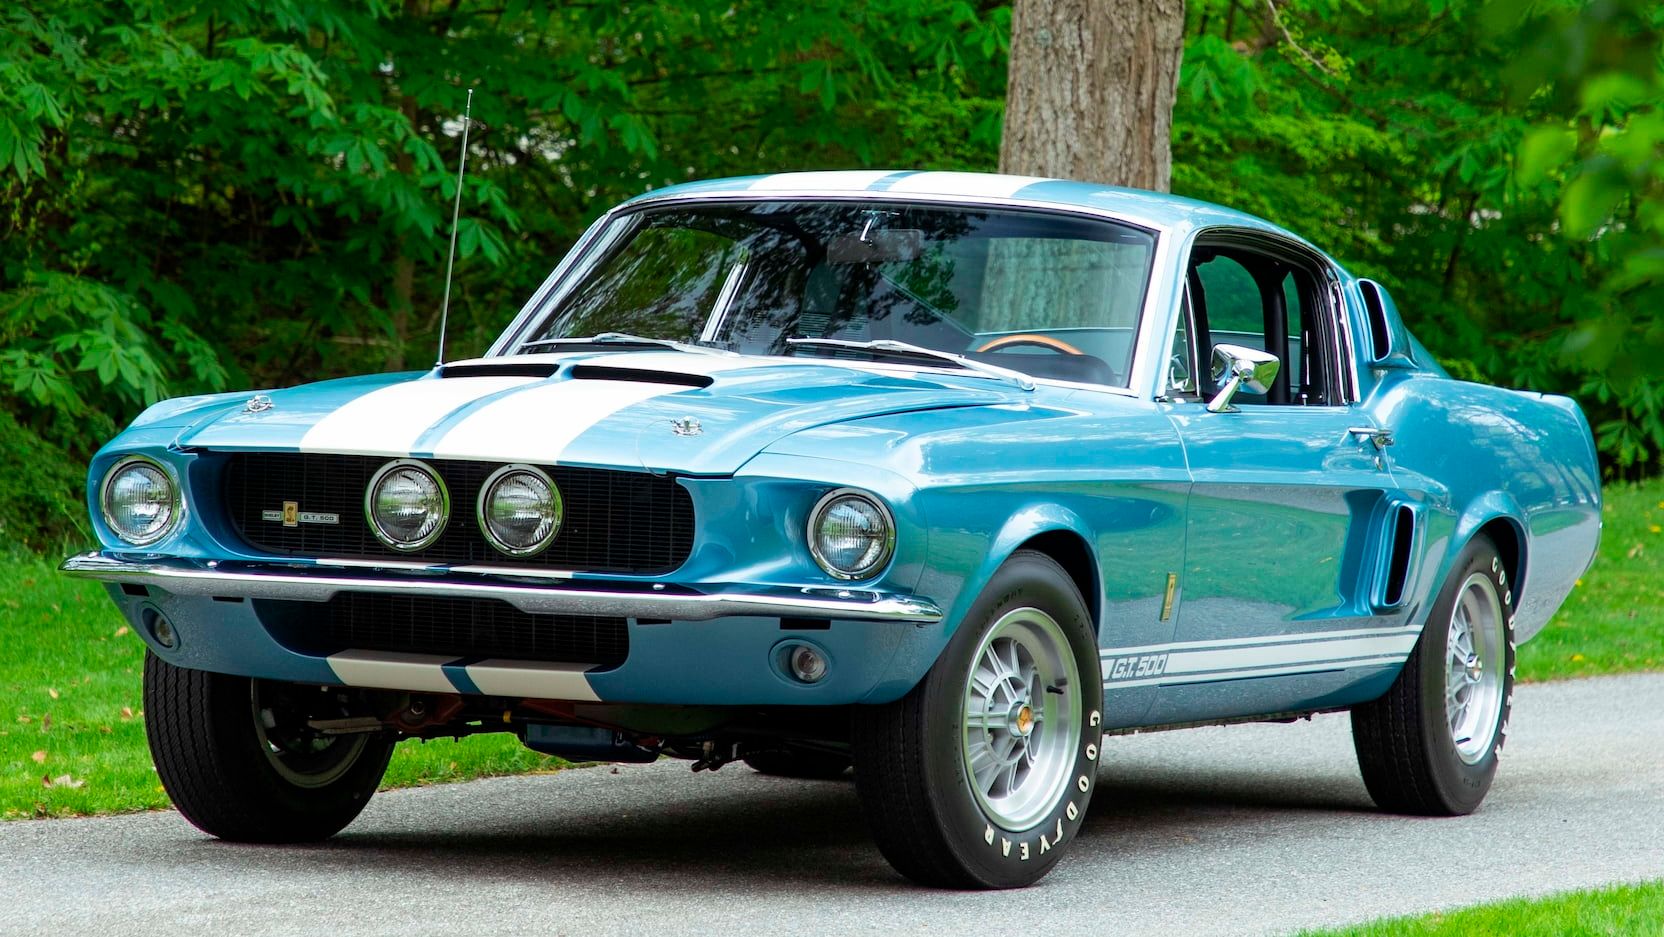 1967 Ford Shelby GT500: The muscle car that is an icon.